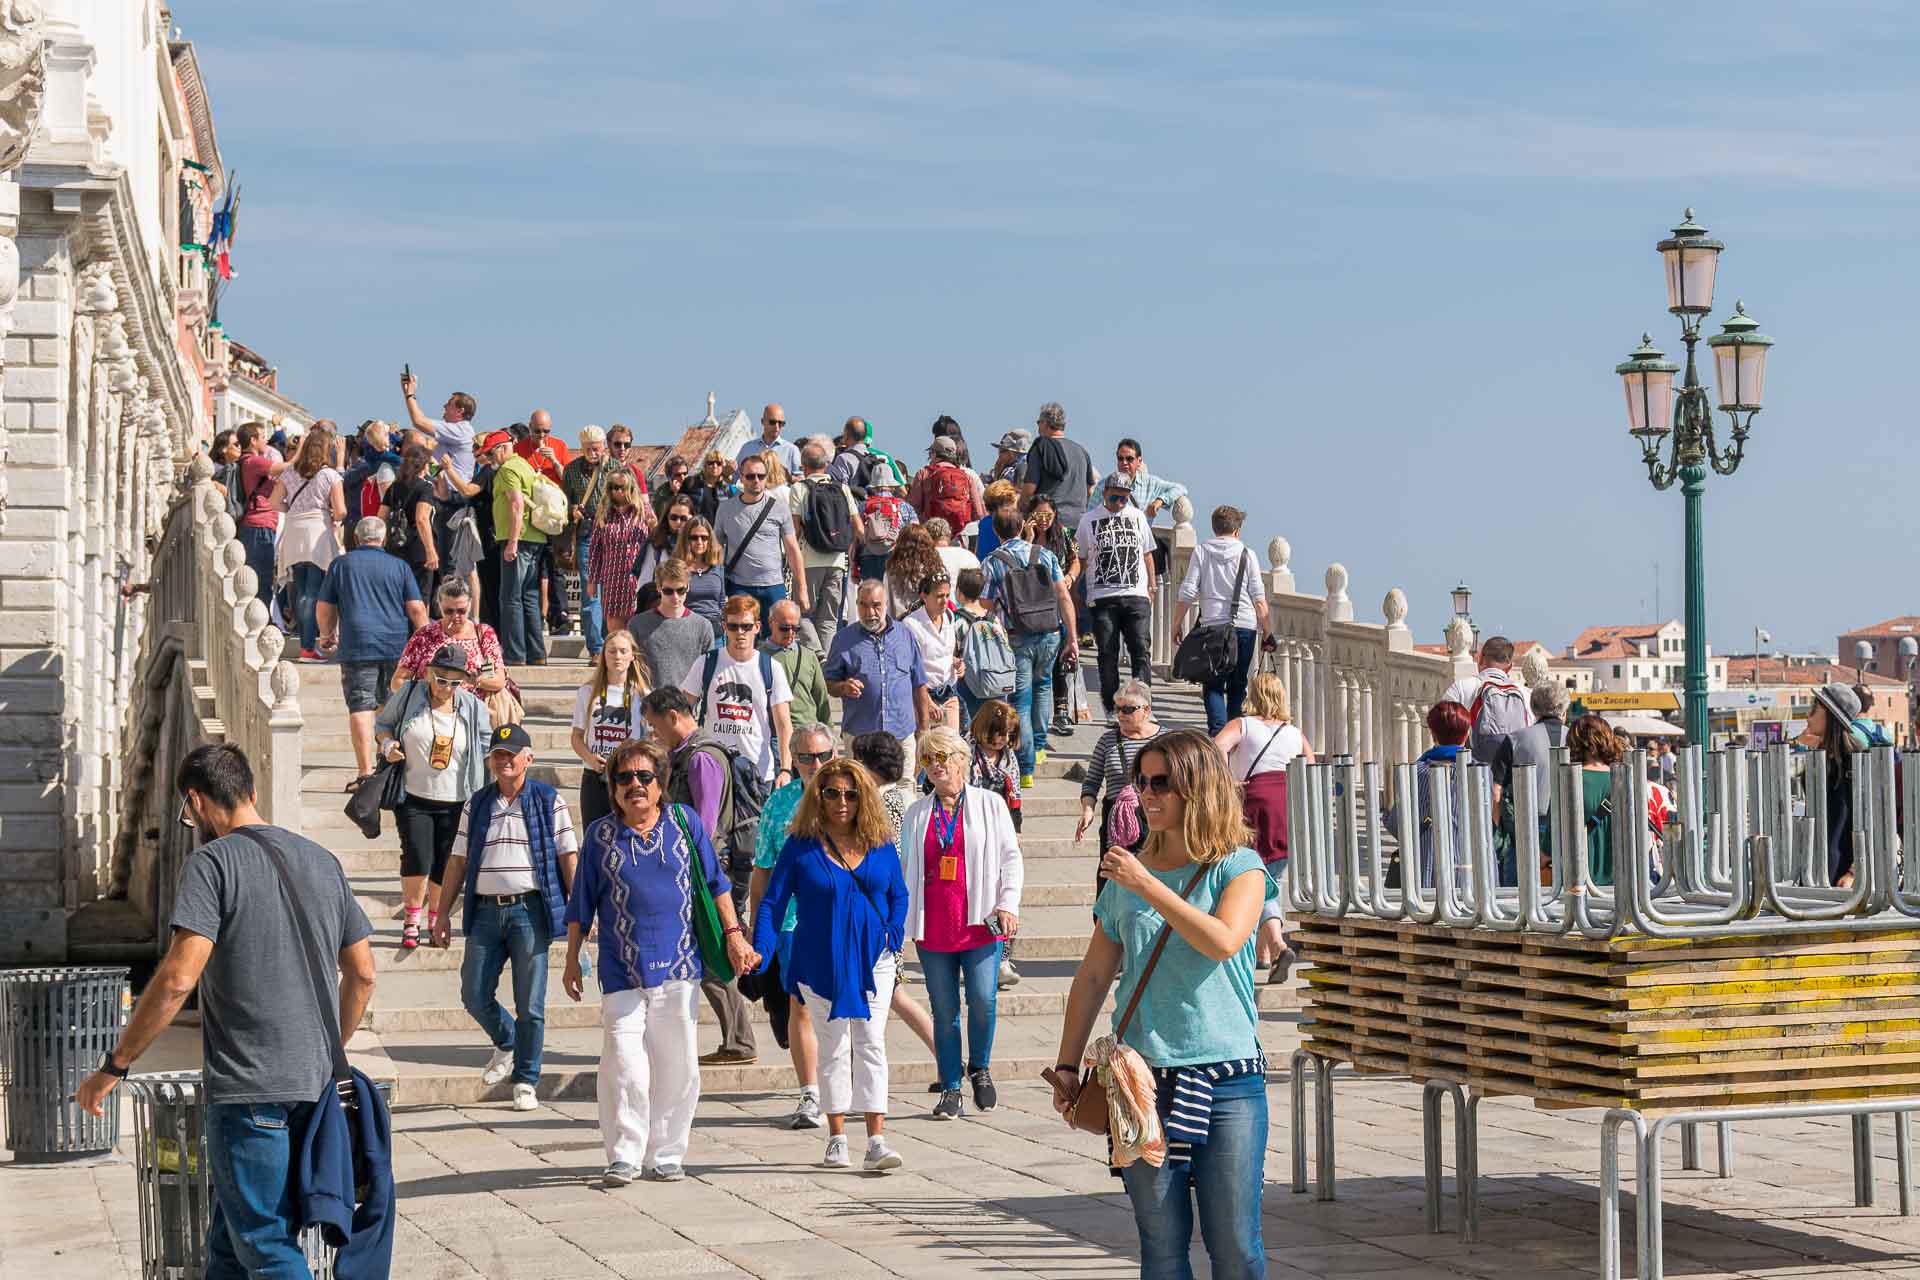 Many tourists in Venice over a bridge